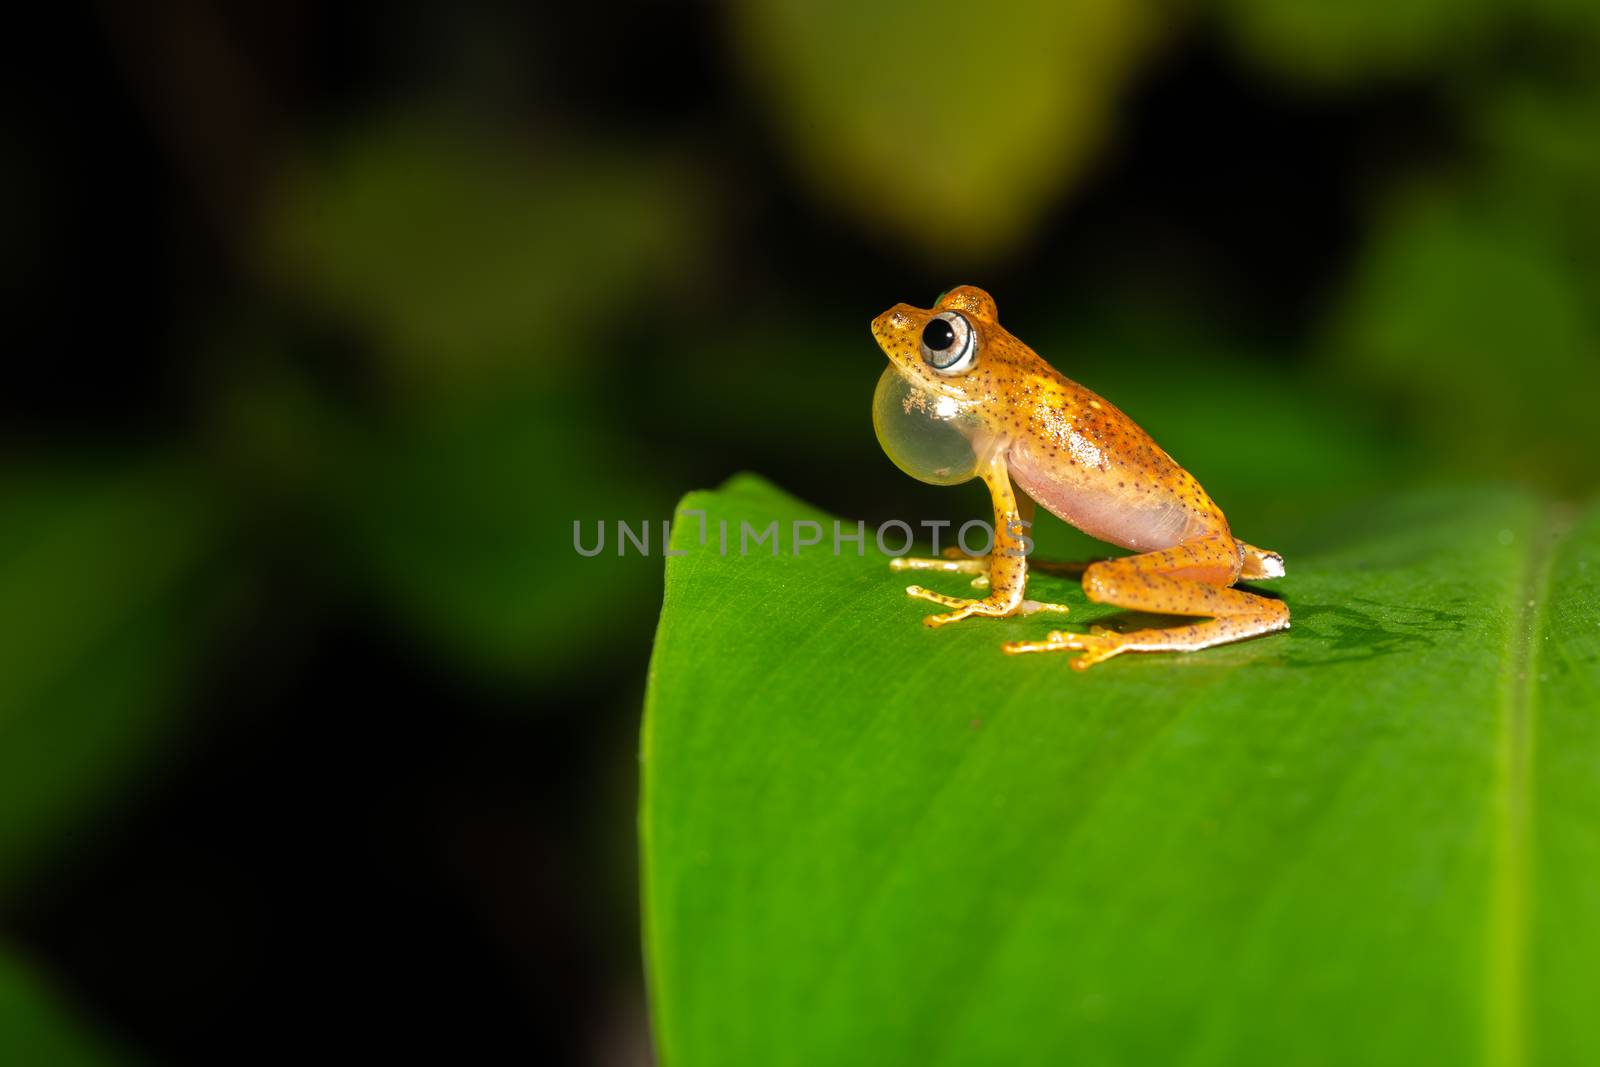 An orange little frog on a green leaf in Madagascar by 25ehaag6